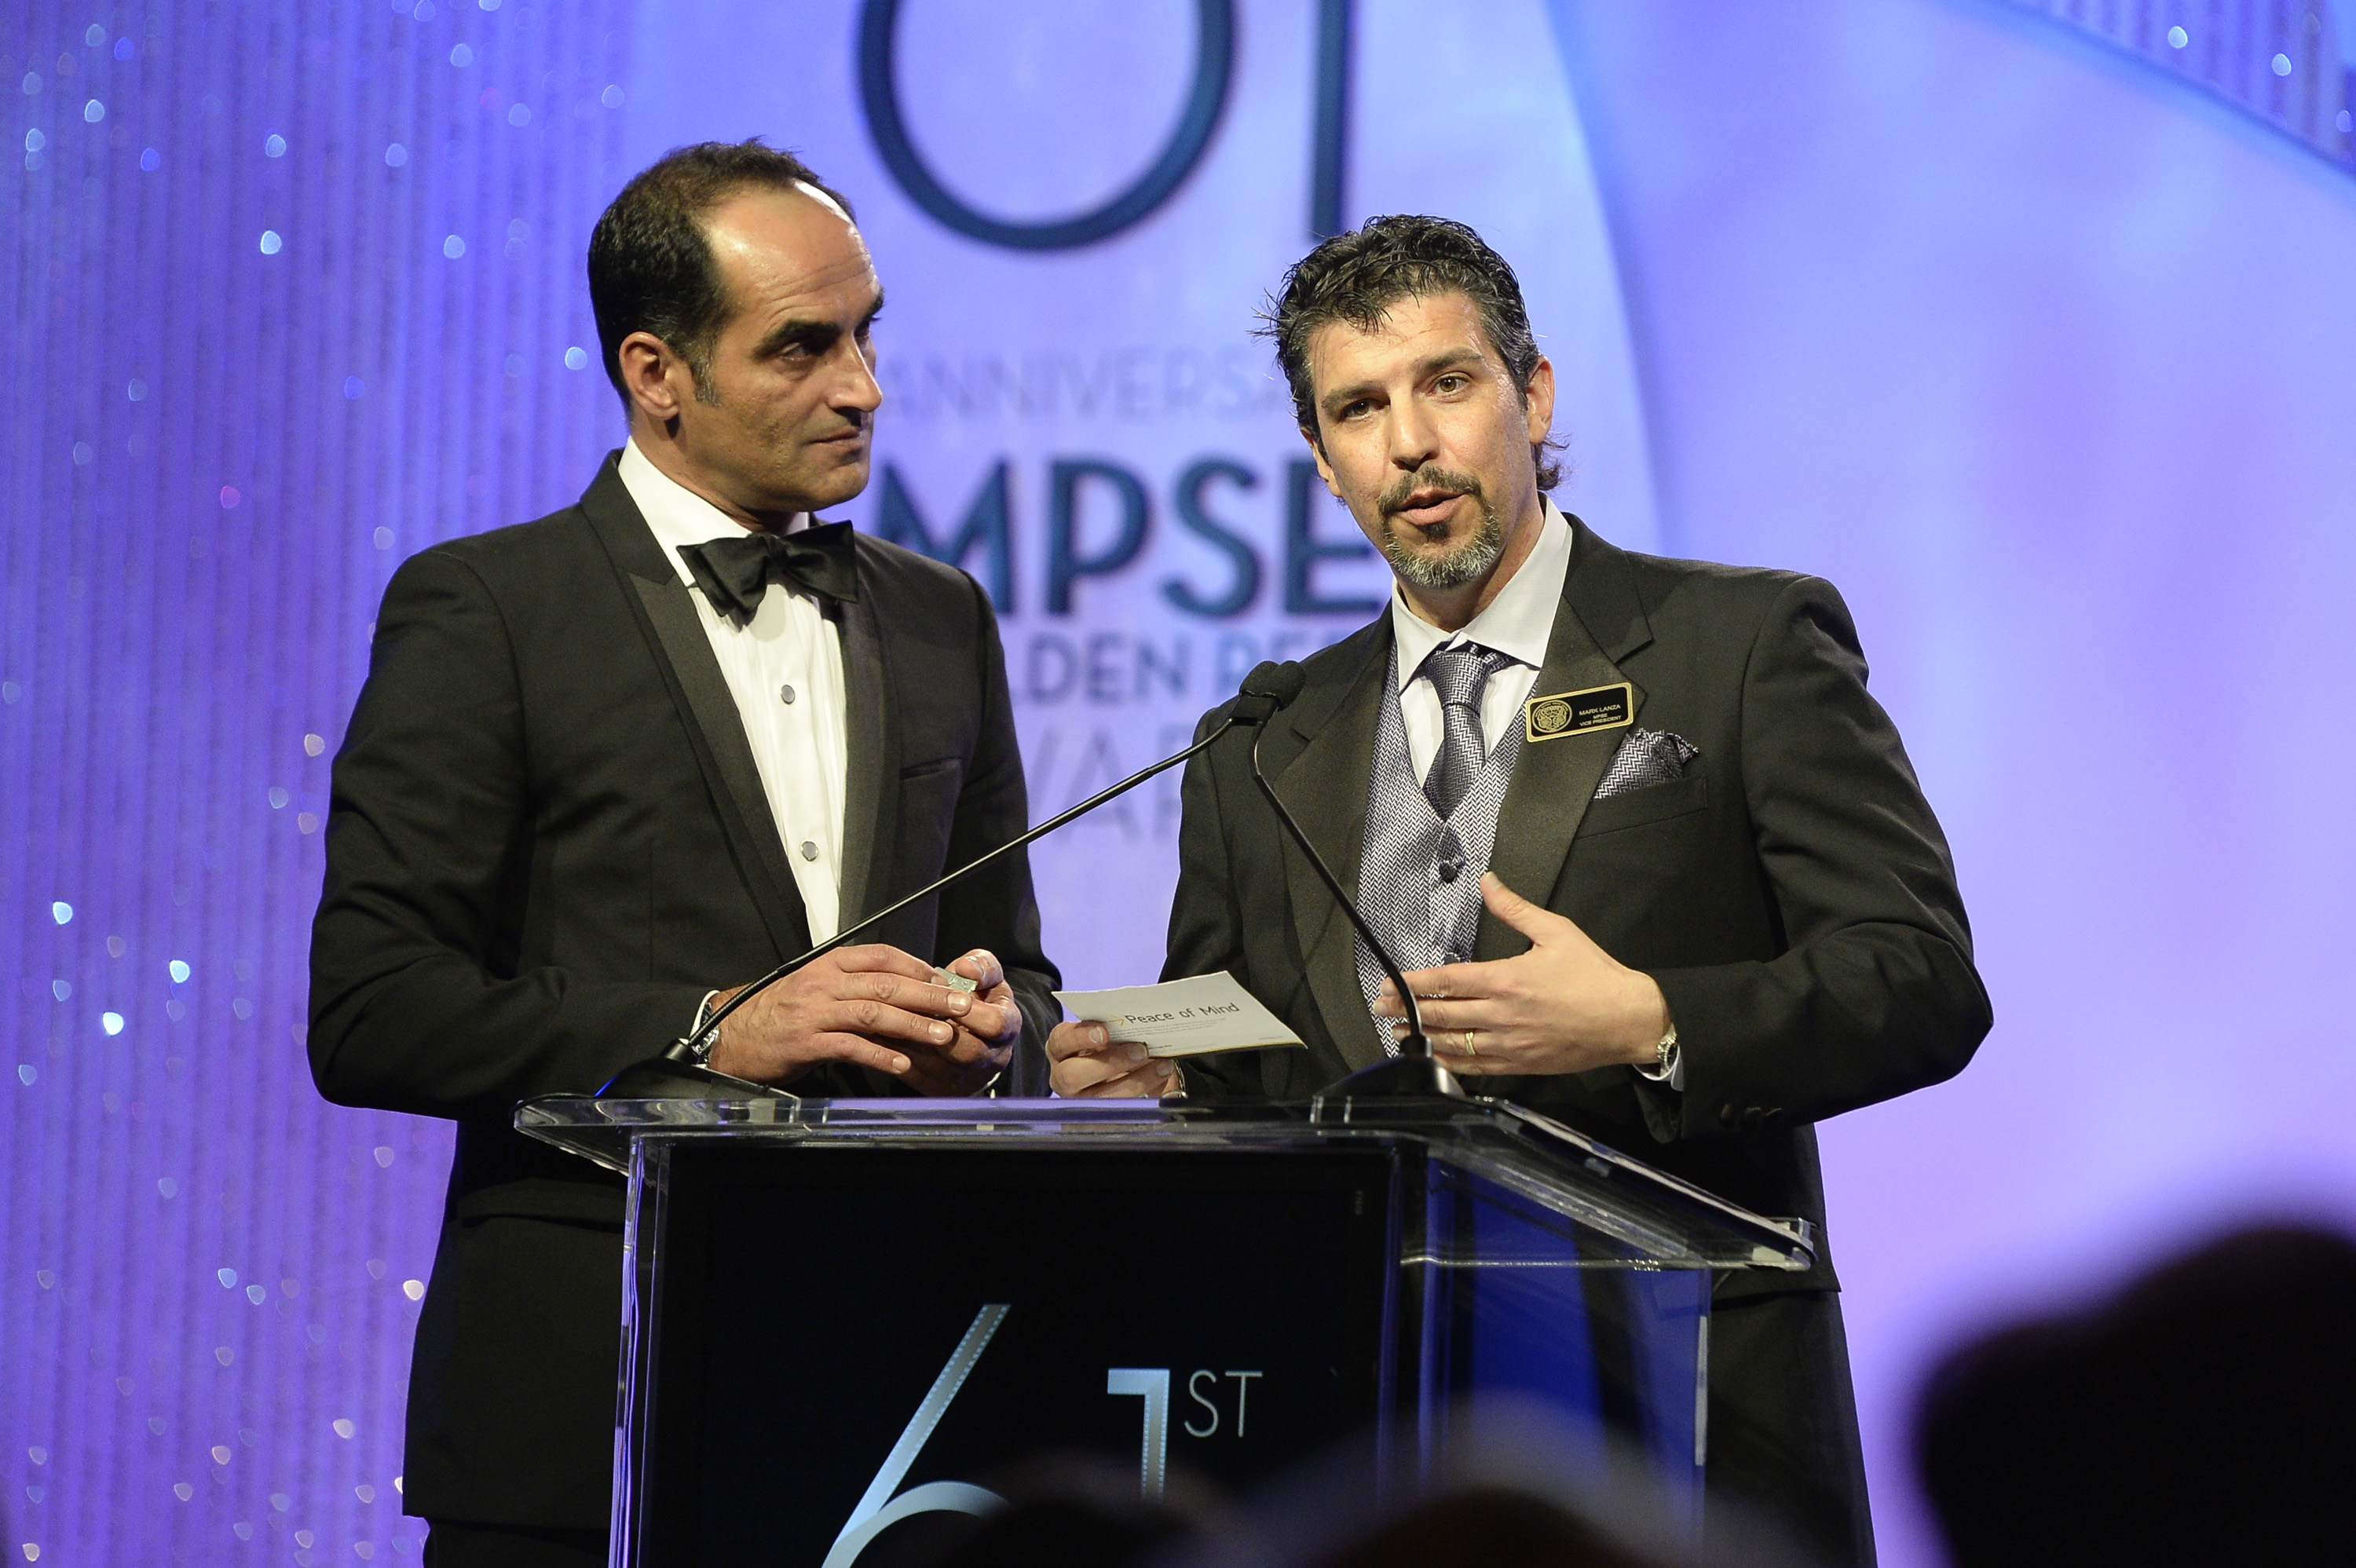 Navid Negahban (Homeland's infamous Abu Nazir) and Mark Lanza (MPSE Vice President) present an award at the 2013 Motion Picture Sound Editor Awards.